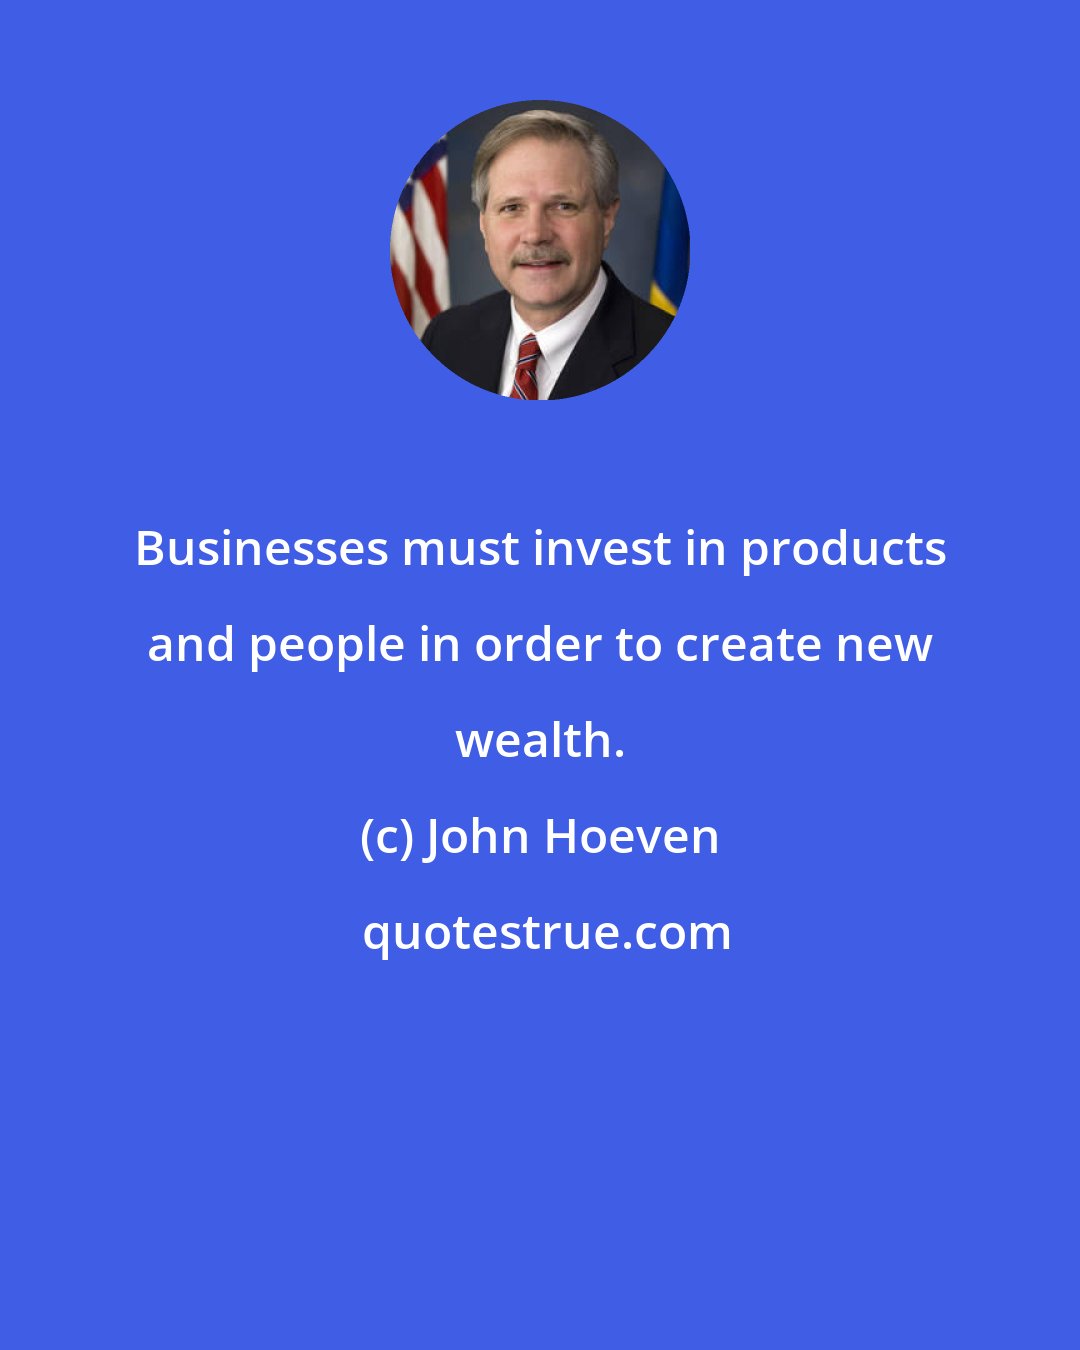 John Hoeven: Businesses must invest in products and people in order to create new wealth.